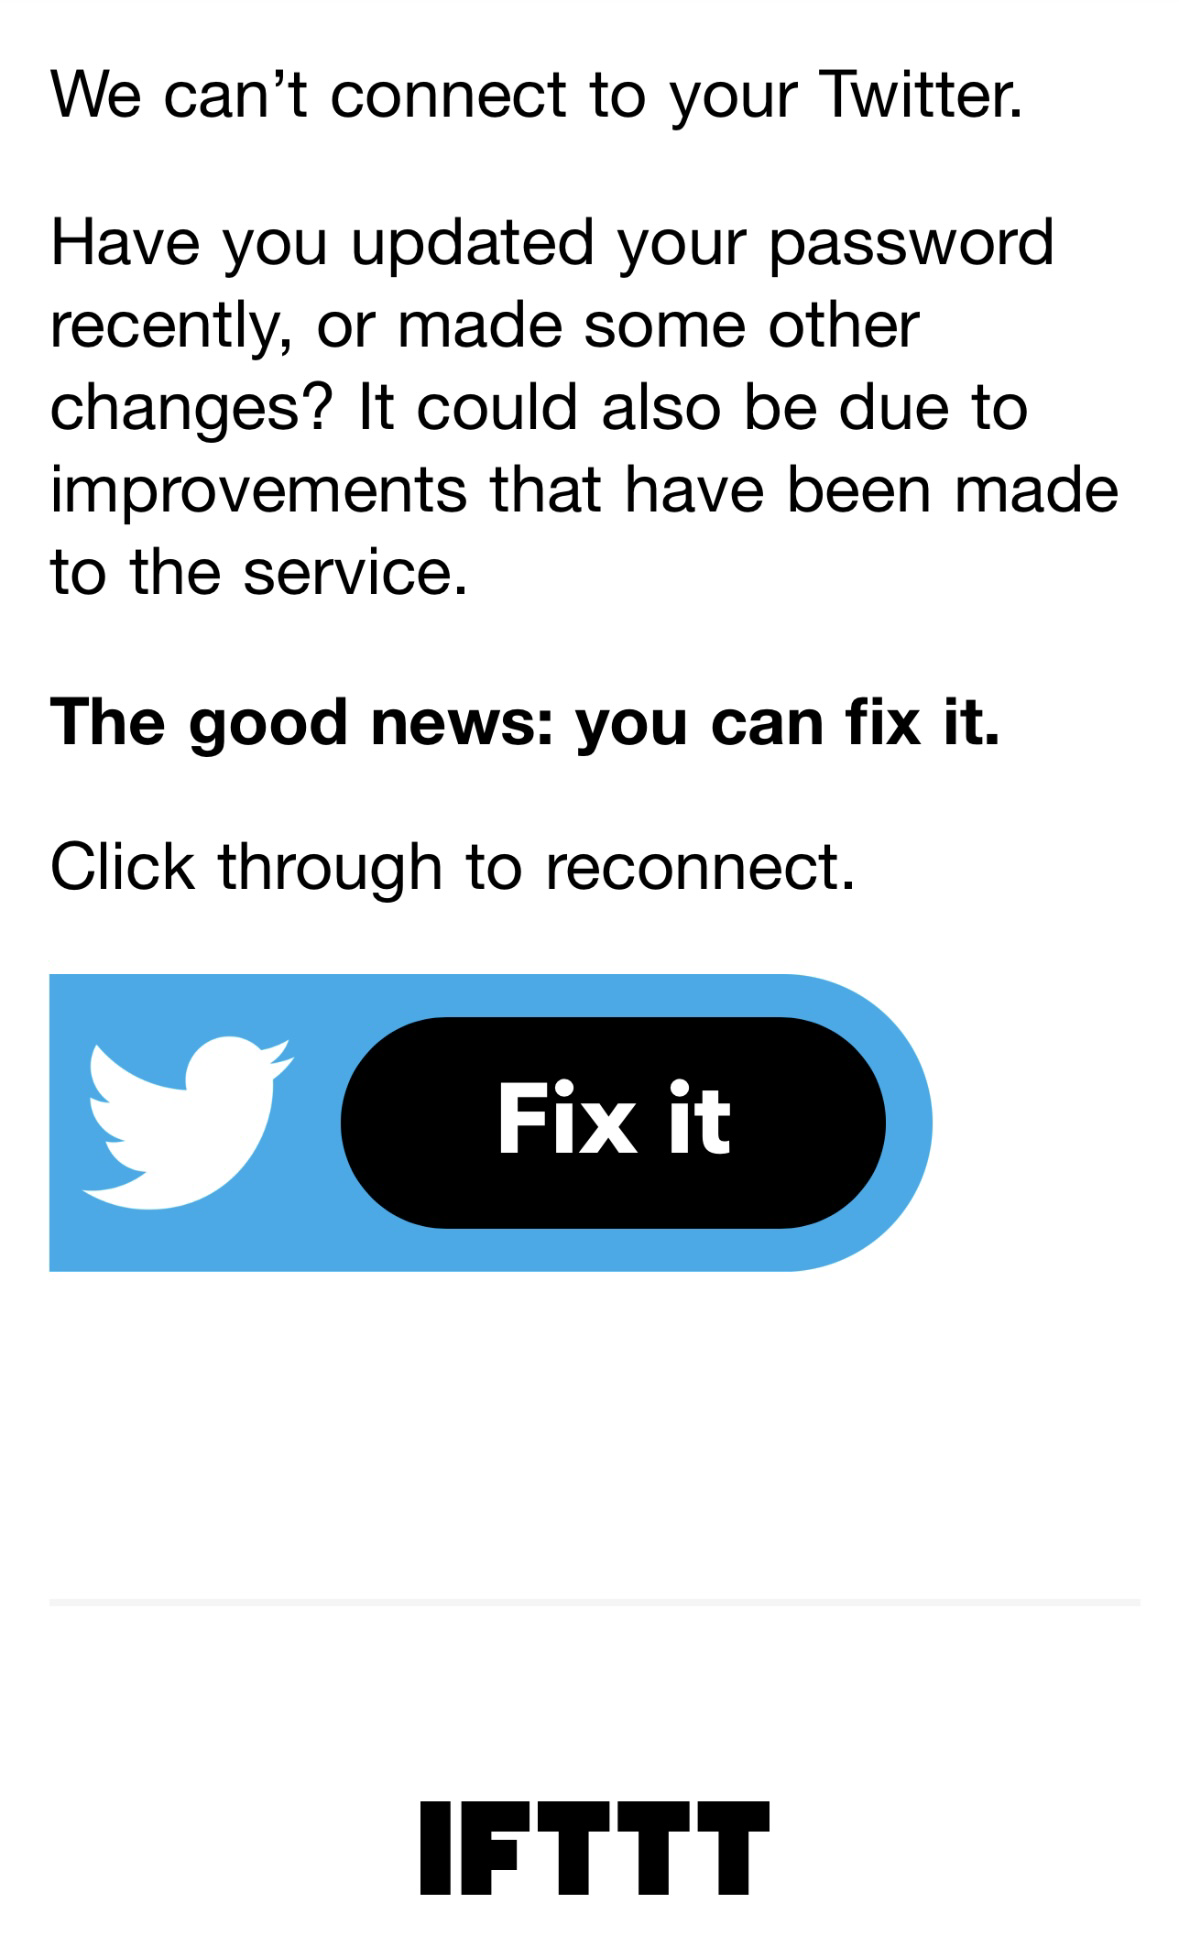 Screenshot of an email that reads “We can't connect to your Twitter. Have you updated your password recently, or made some other changes? It could also be due to improvements that have been made to the service. The good news: you can fix it. Click through to reconnect. Fix it. IFTTT”